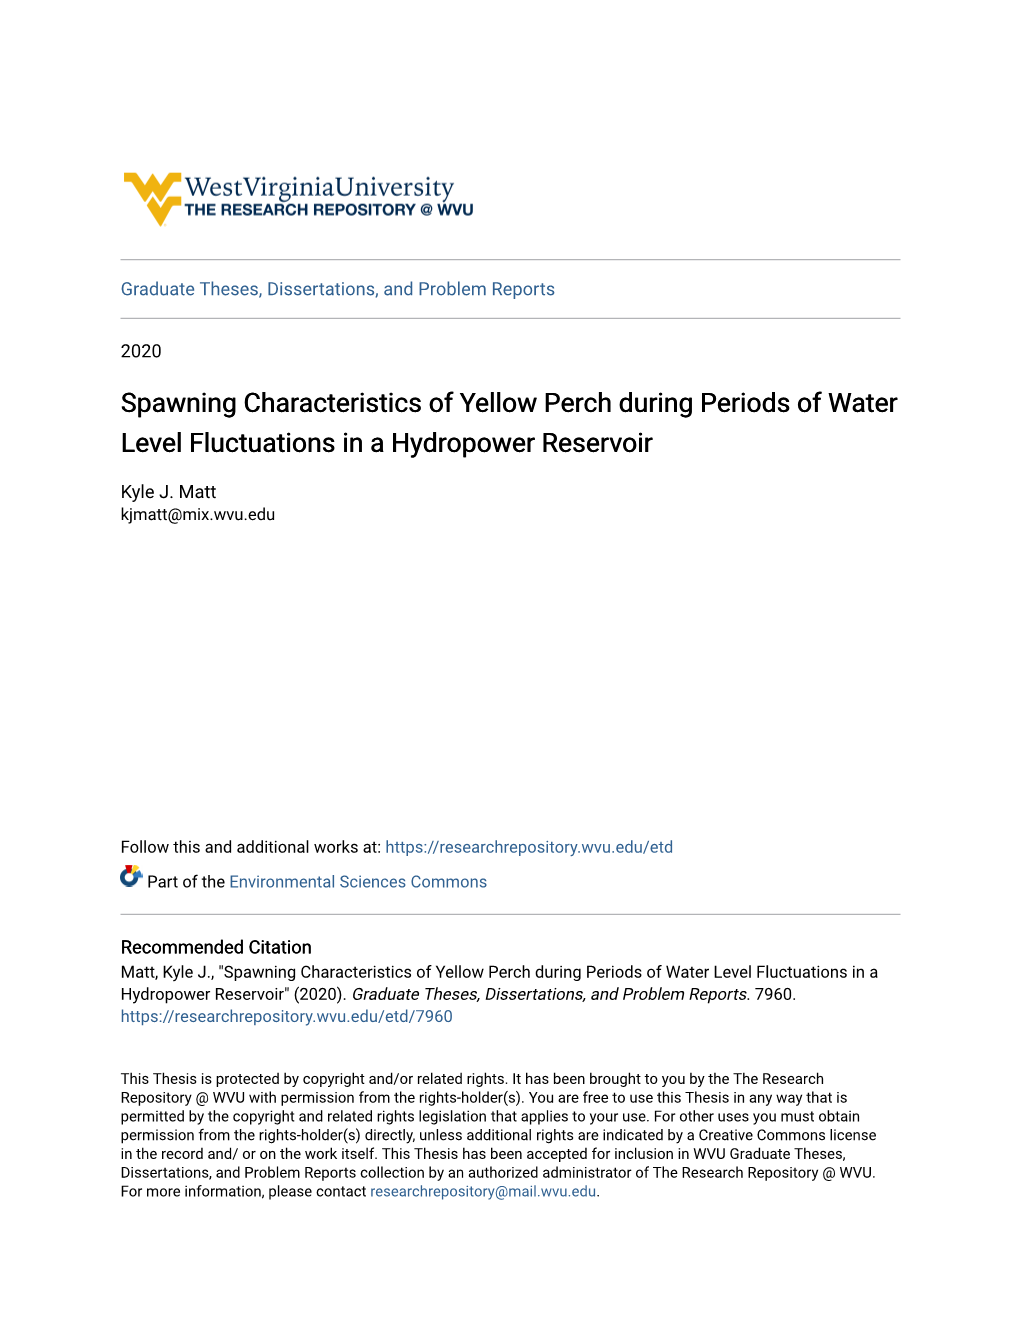 Spawning Characteristics of Yellow Perch During Periods of Water Level Fluctuations in a Hydropower Reservoir